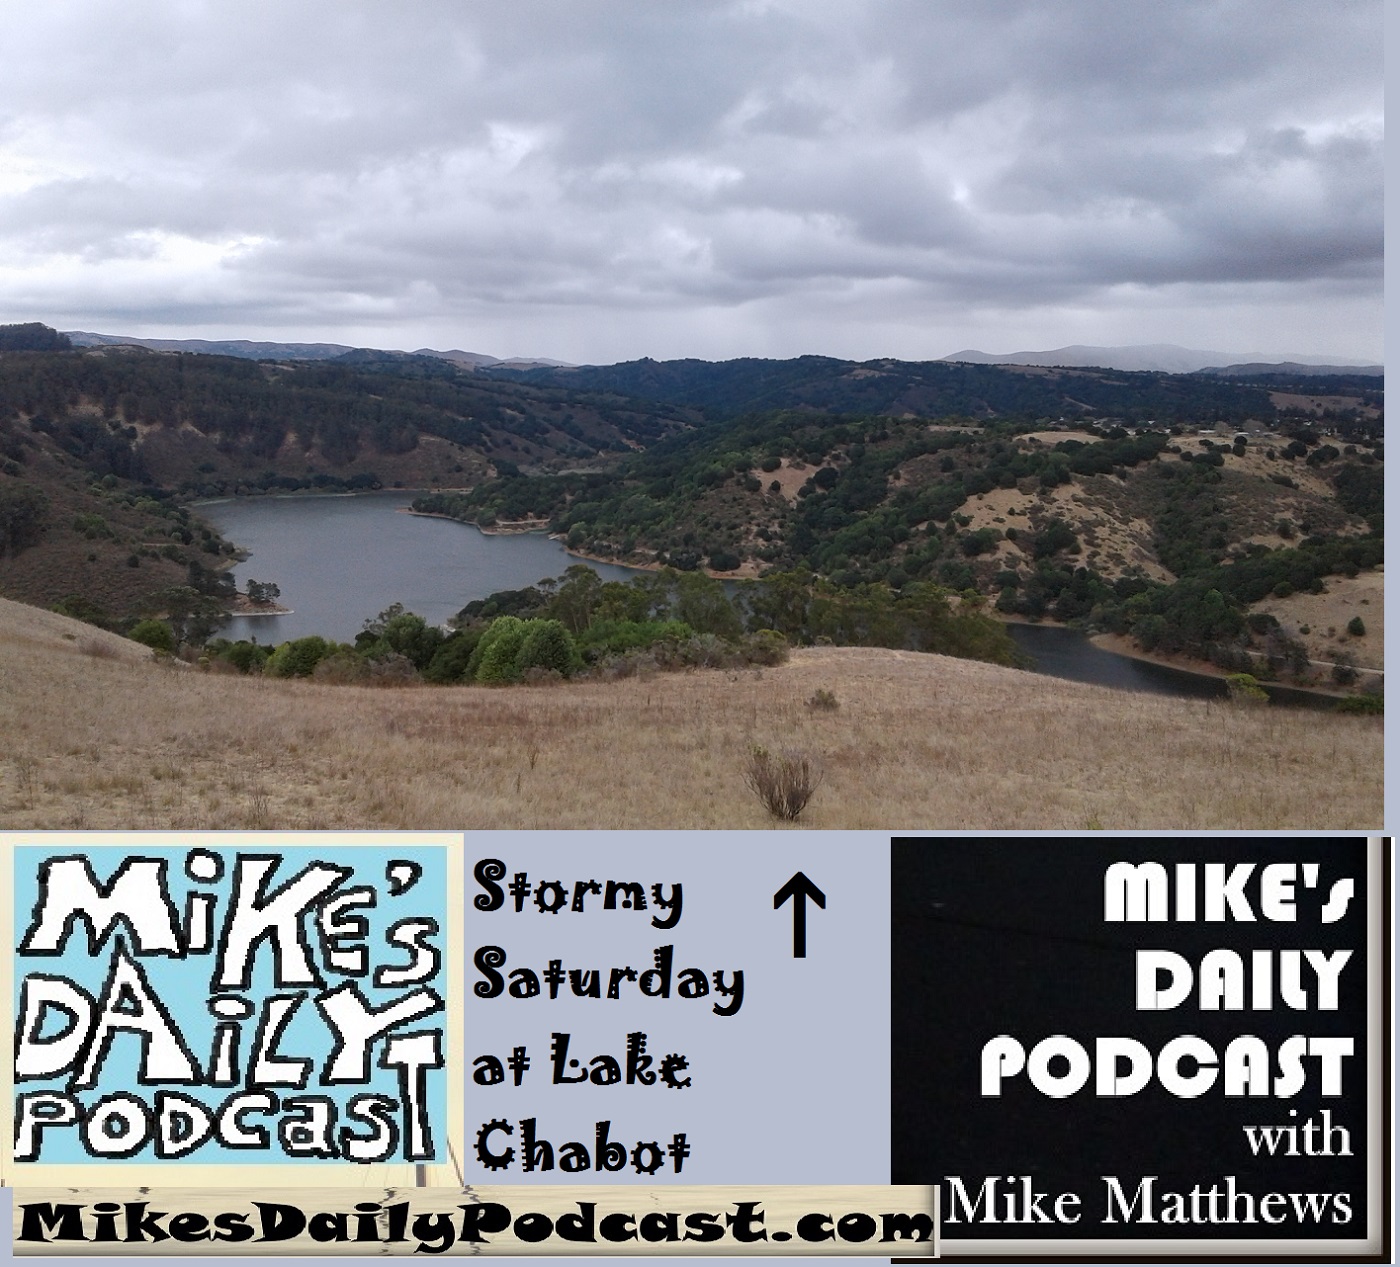 mikes-daily-podcast-1197-lake-chabot-storm